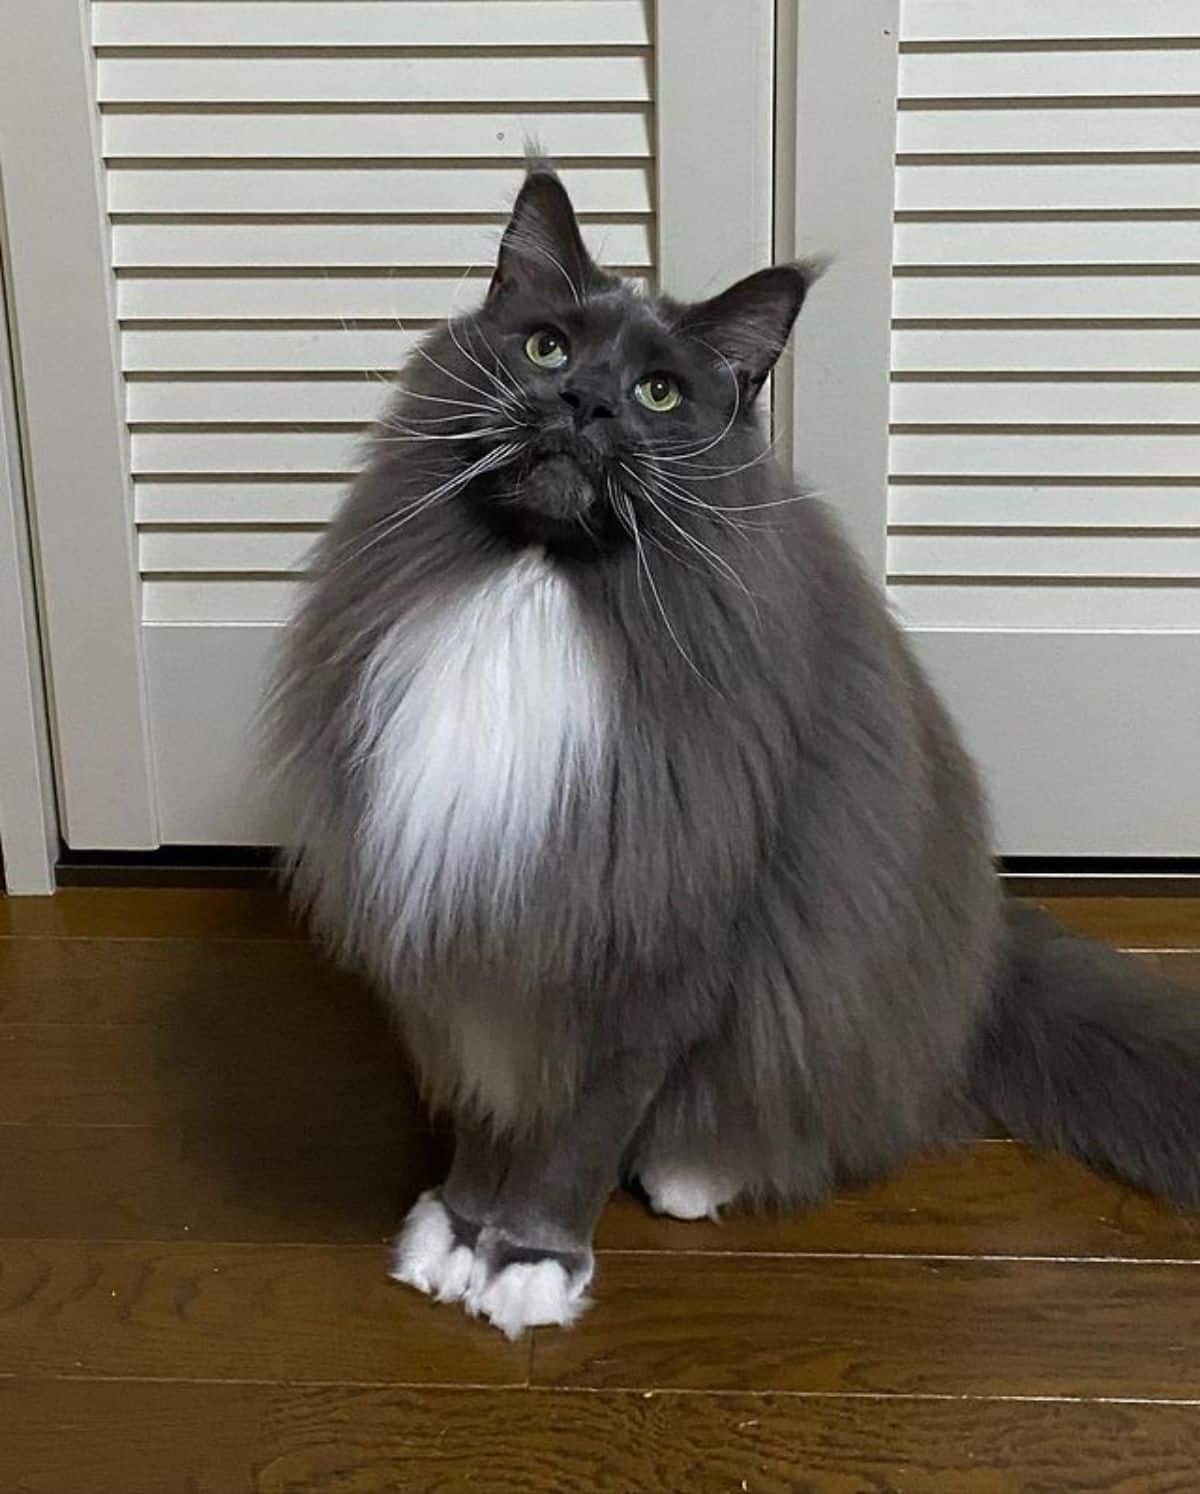 A fluffy gray maine coon sitting on the floor.